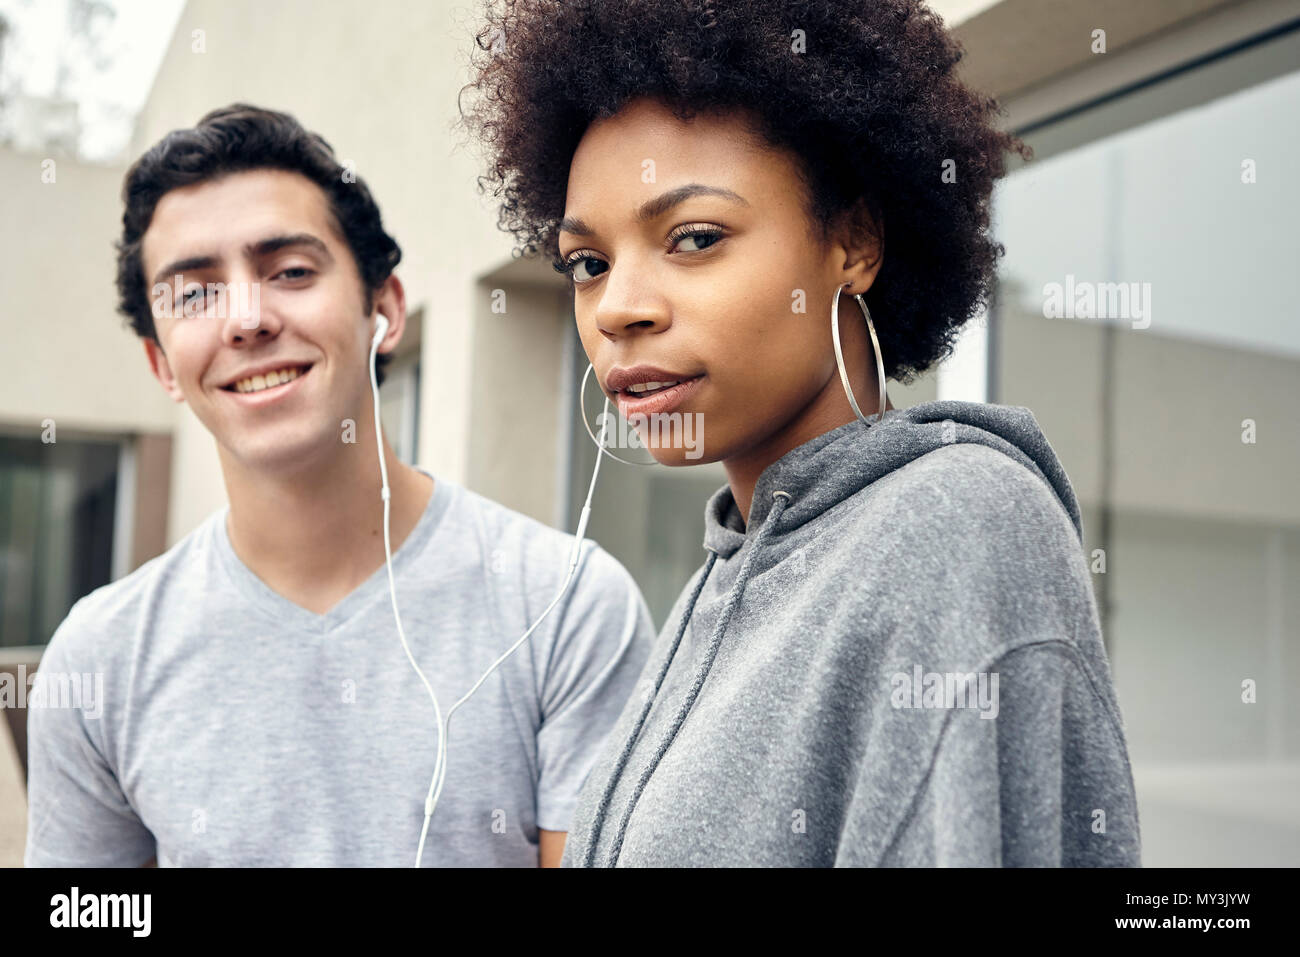 Friends listening to music together with earphones, portrait Stock Photo